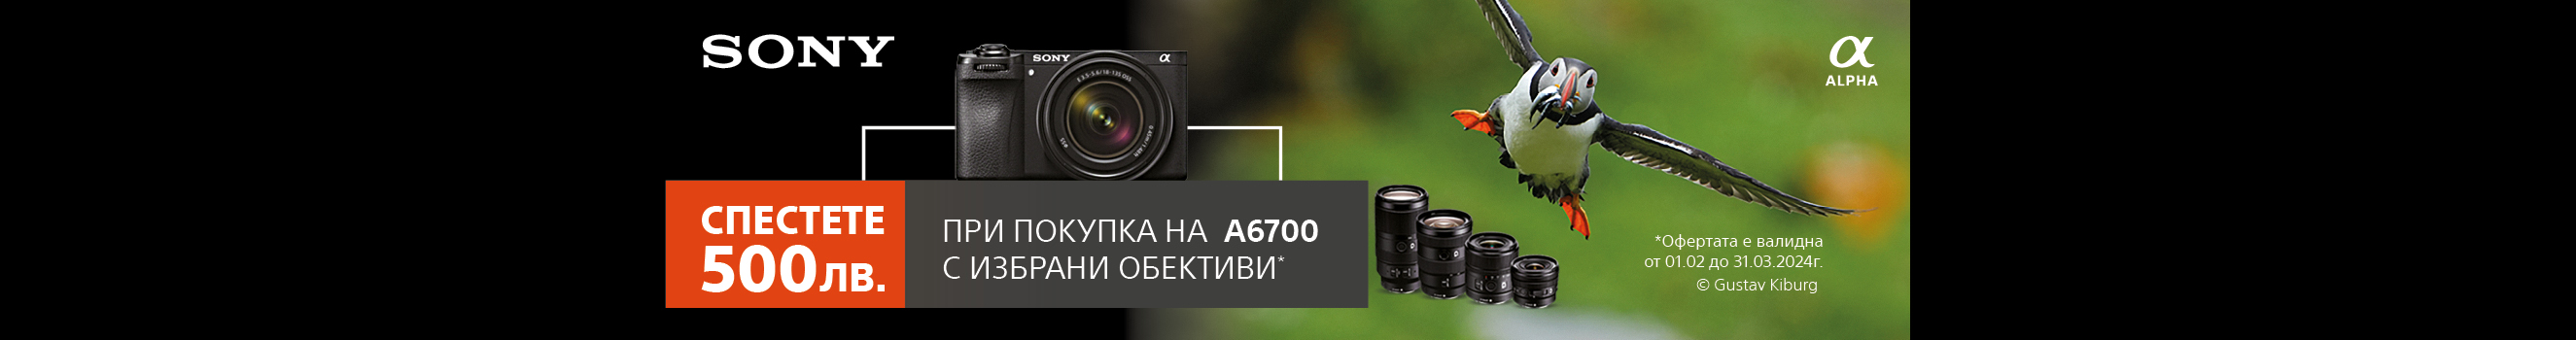  Get selected lenses with a BGN 500 discount each when purchased together with a Sony A6700 camera until 31.03